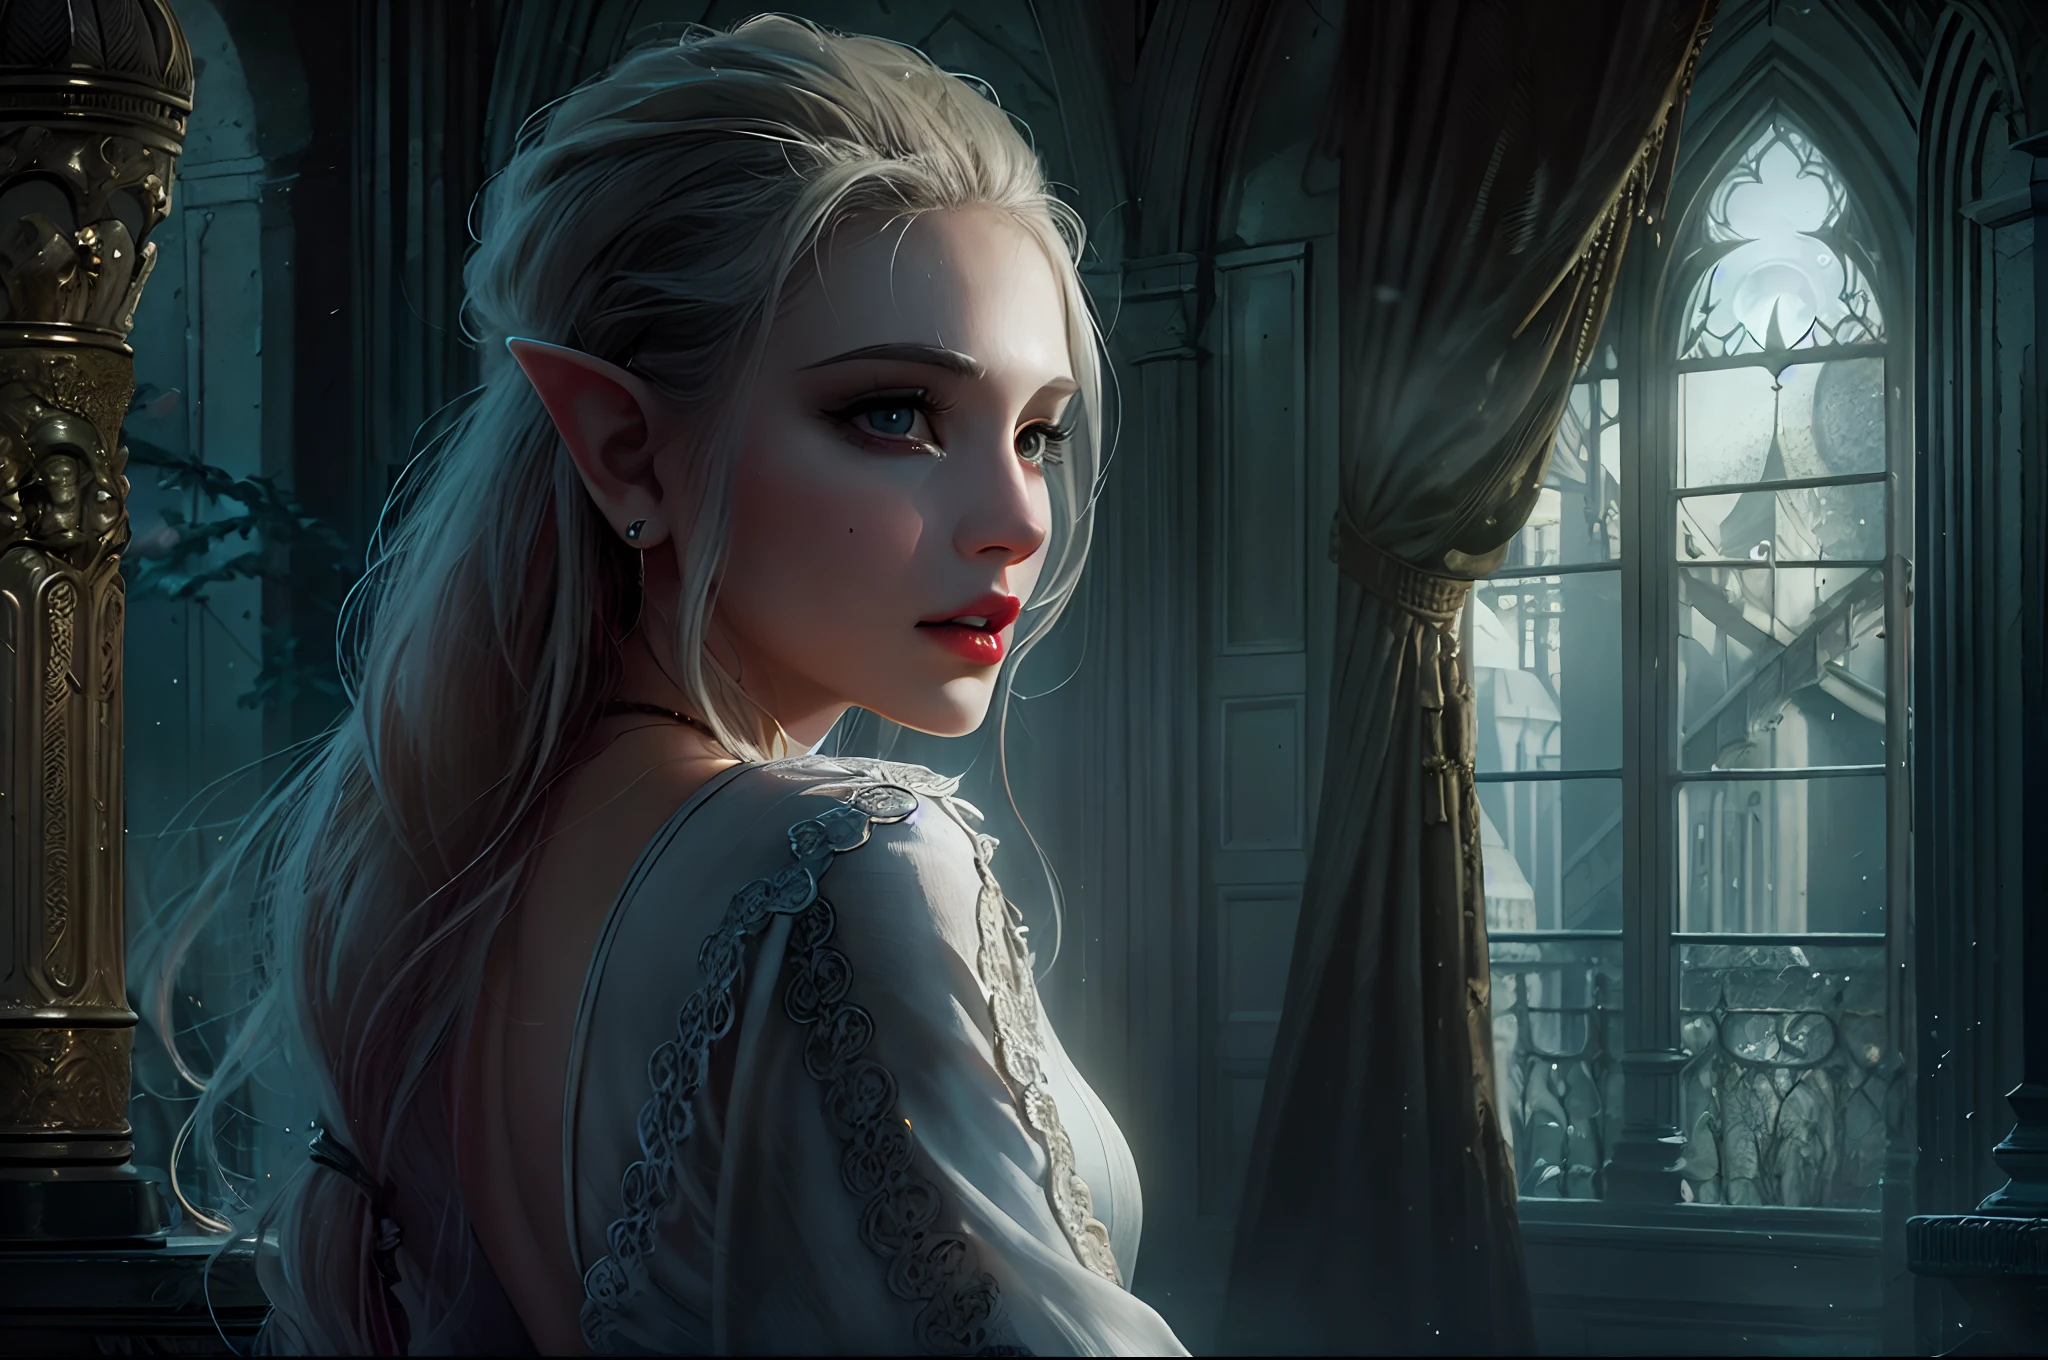 a picture of vampire elf in her castle, an exquisite beautiful female vampire elf in her library,  full body (ultra detailed, Masterpiece, best quality), ultra detailed face (ultra detailed, Masterpiece, best quality), grey skin, blond hair, hair in a ponytail, long hair, blue eyes, cold eyes, glowing eyes, intense eyes,  small pointed ears, smirking, smile with [drops of blood on face] (ultra detailed, Masterpiece, best quality), dark red lips, [vampire fangs], wearing white dress (ultra detailed, Masterpiece, best quality), dark blue cloak, high heeled boots in dark fantasy library, book shelves, high details, best quality, 8k, [ultra detailed], masterpiece, best quality, (ultra detailed), full body, ultra wide shot, photorealism, julie bell, dark fantasy art, moon light coming through the window, moon rays, gothic art, sense of dread, sense of seduction